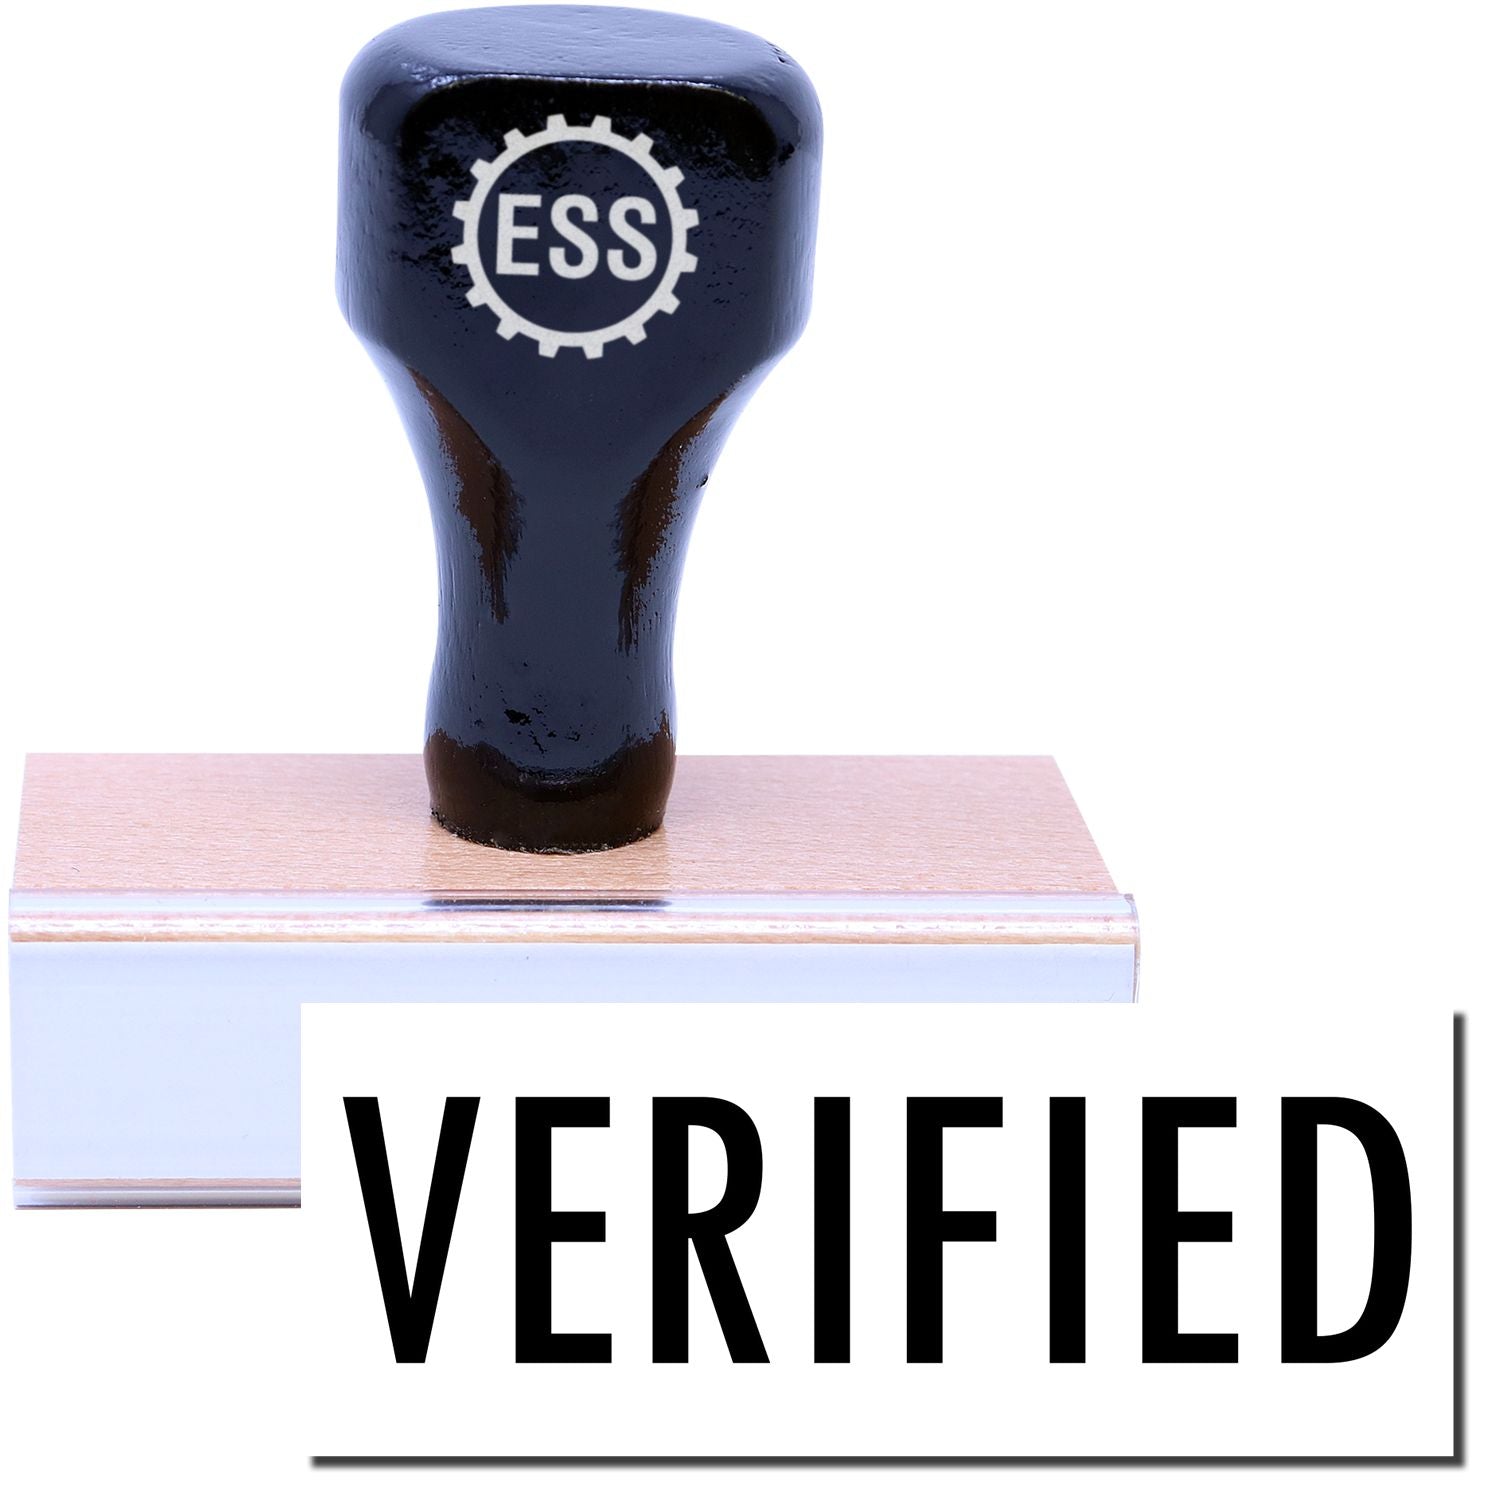 A stock office rubber stamp with a stamped image showing how the text "VERIFIED" in a large font is displayed after stamping.